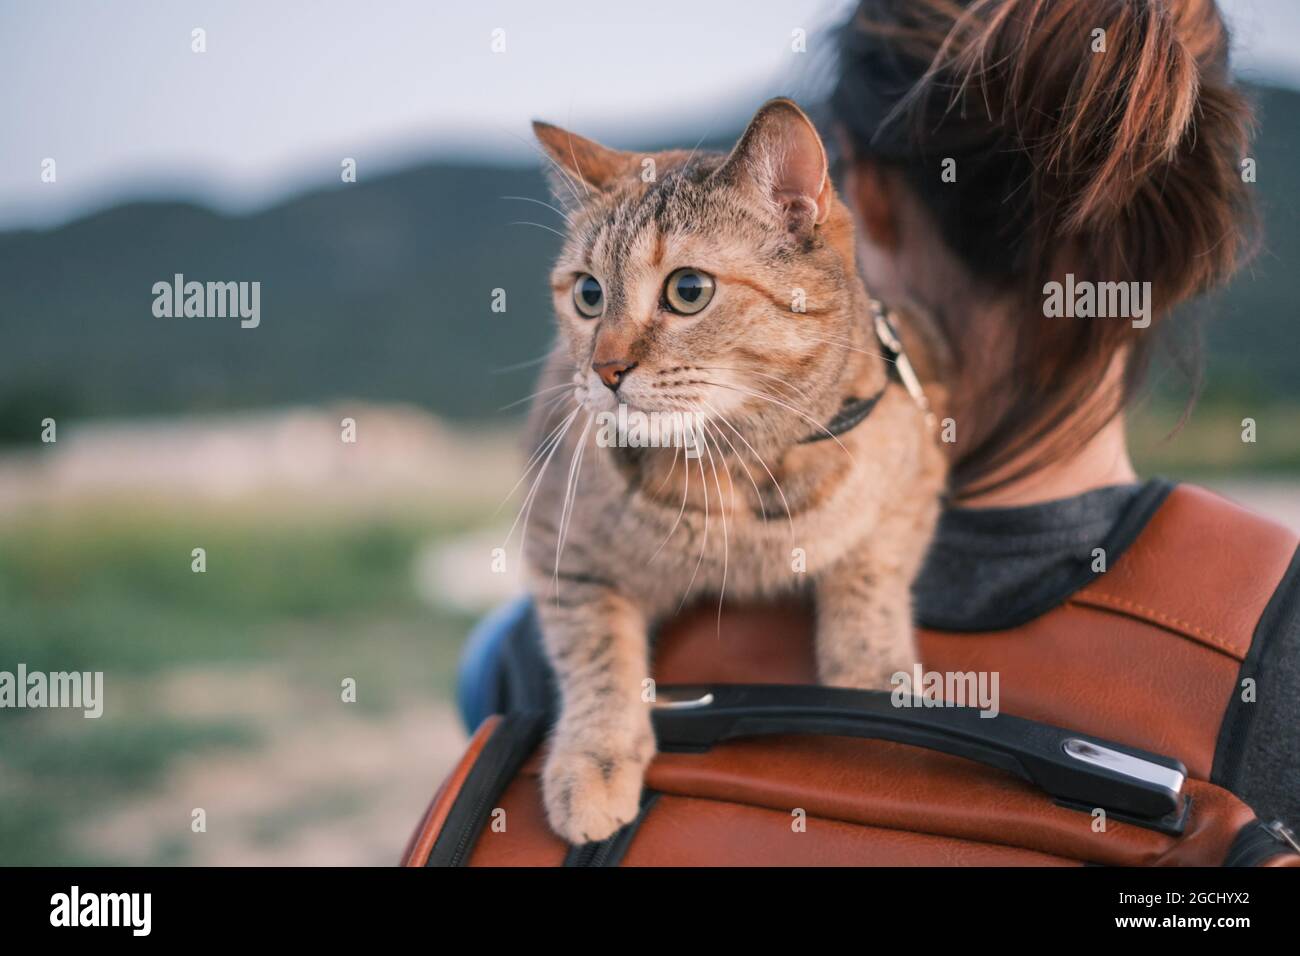 Woman walking with cat on her shoulder in the park. Stock Photo